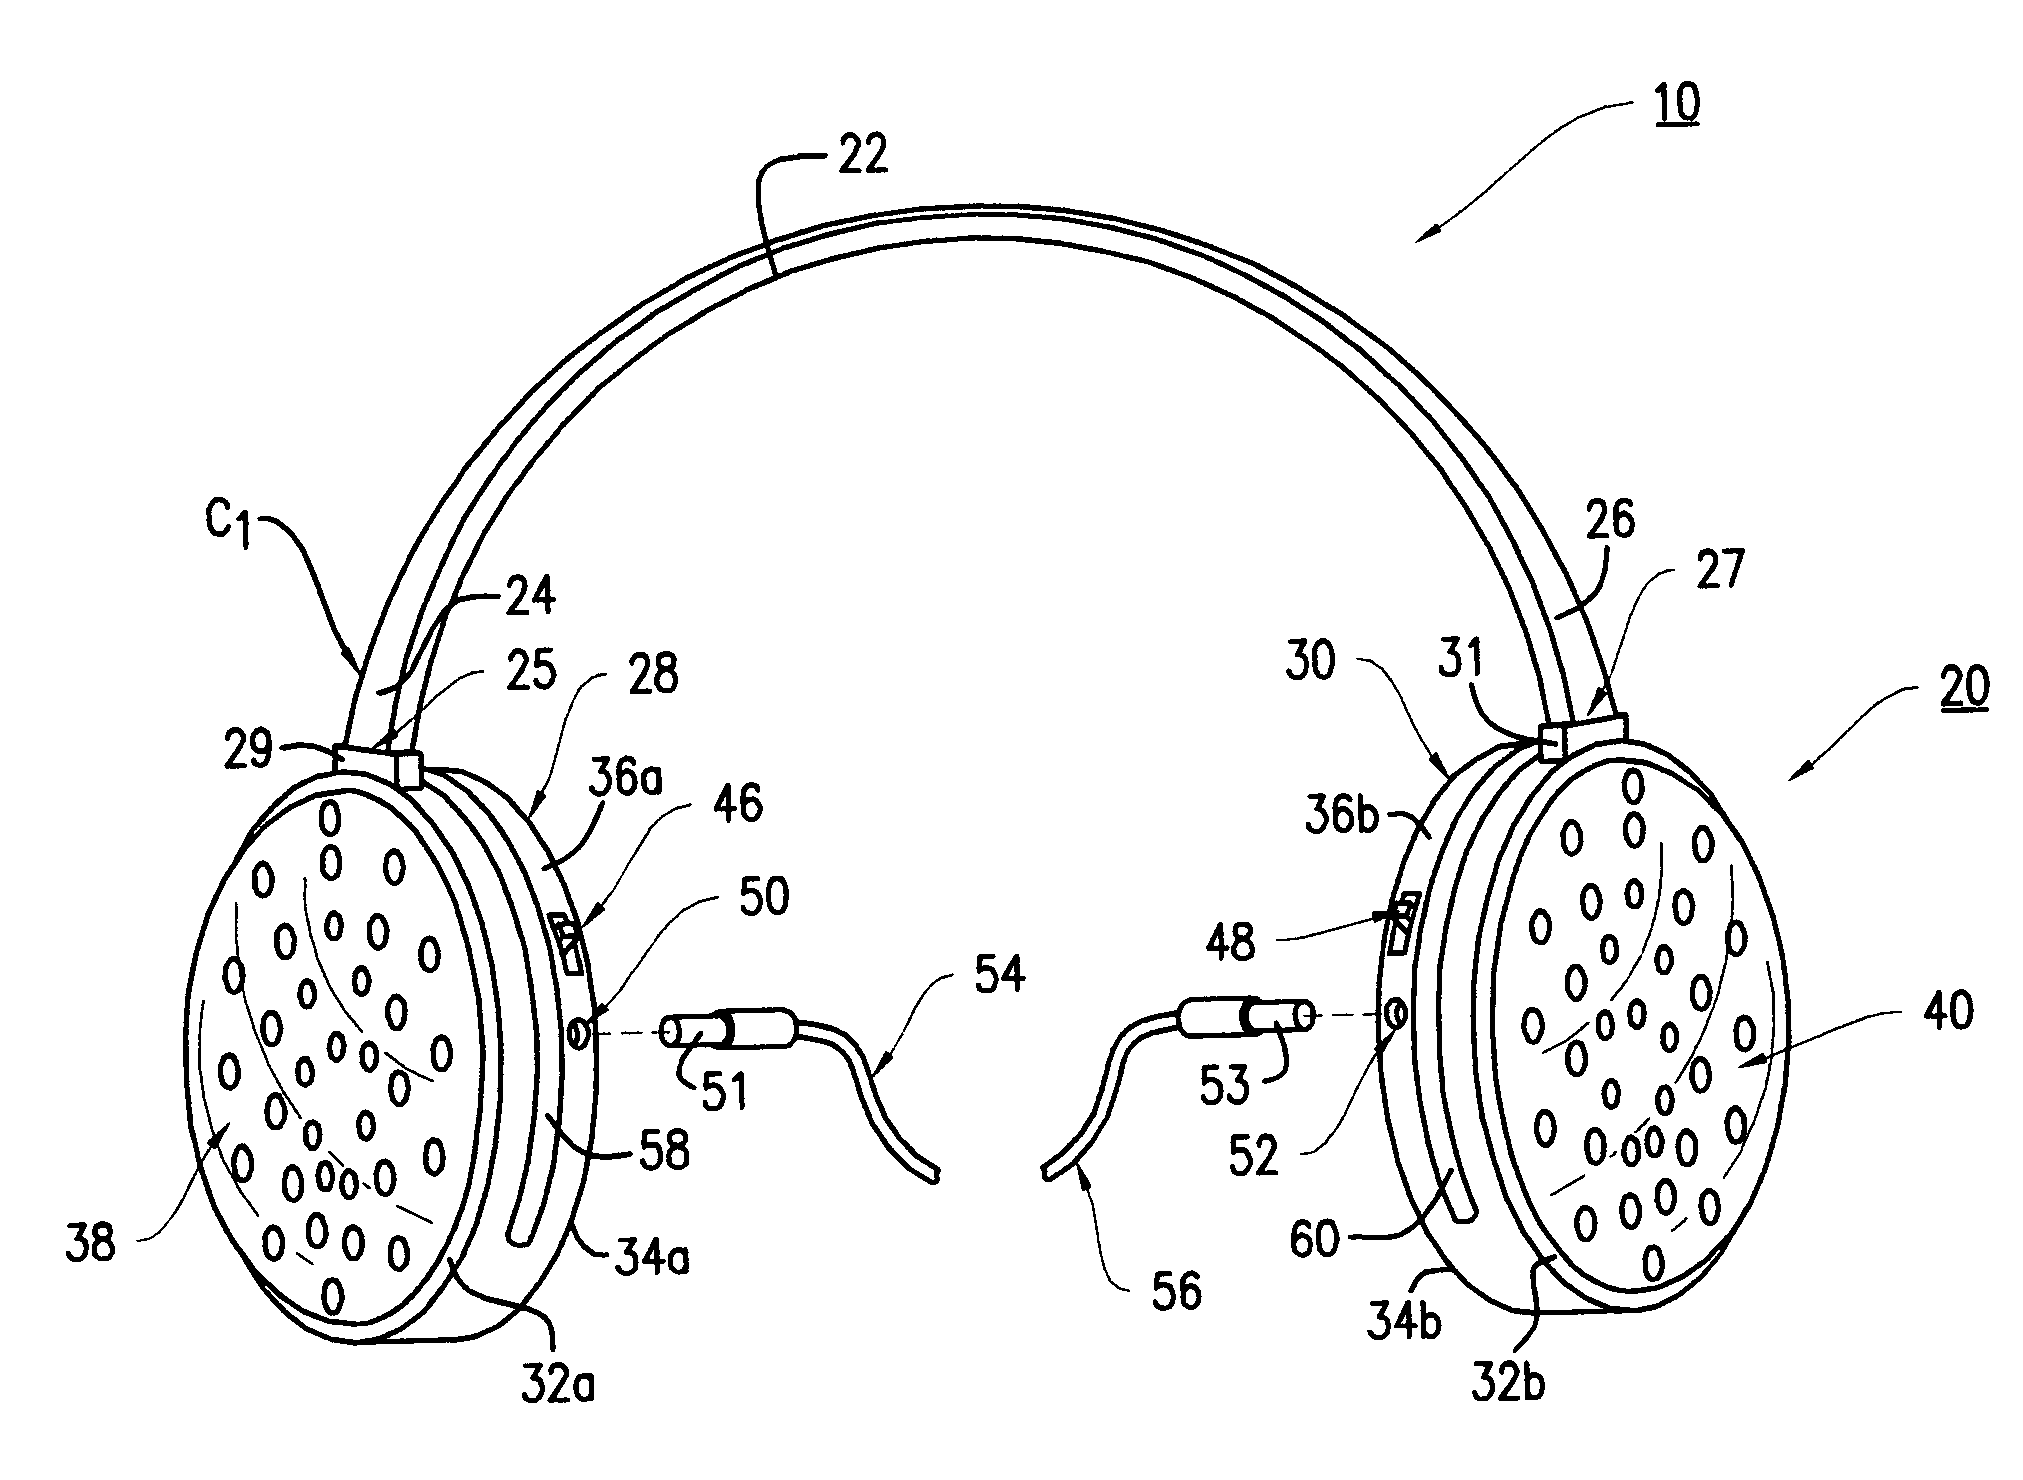 Combined headphone set and portable speaker assembly